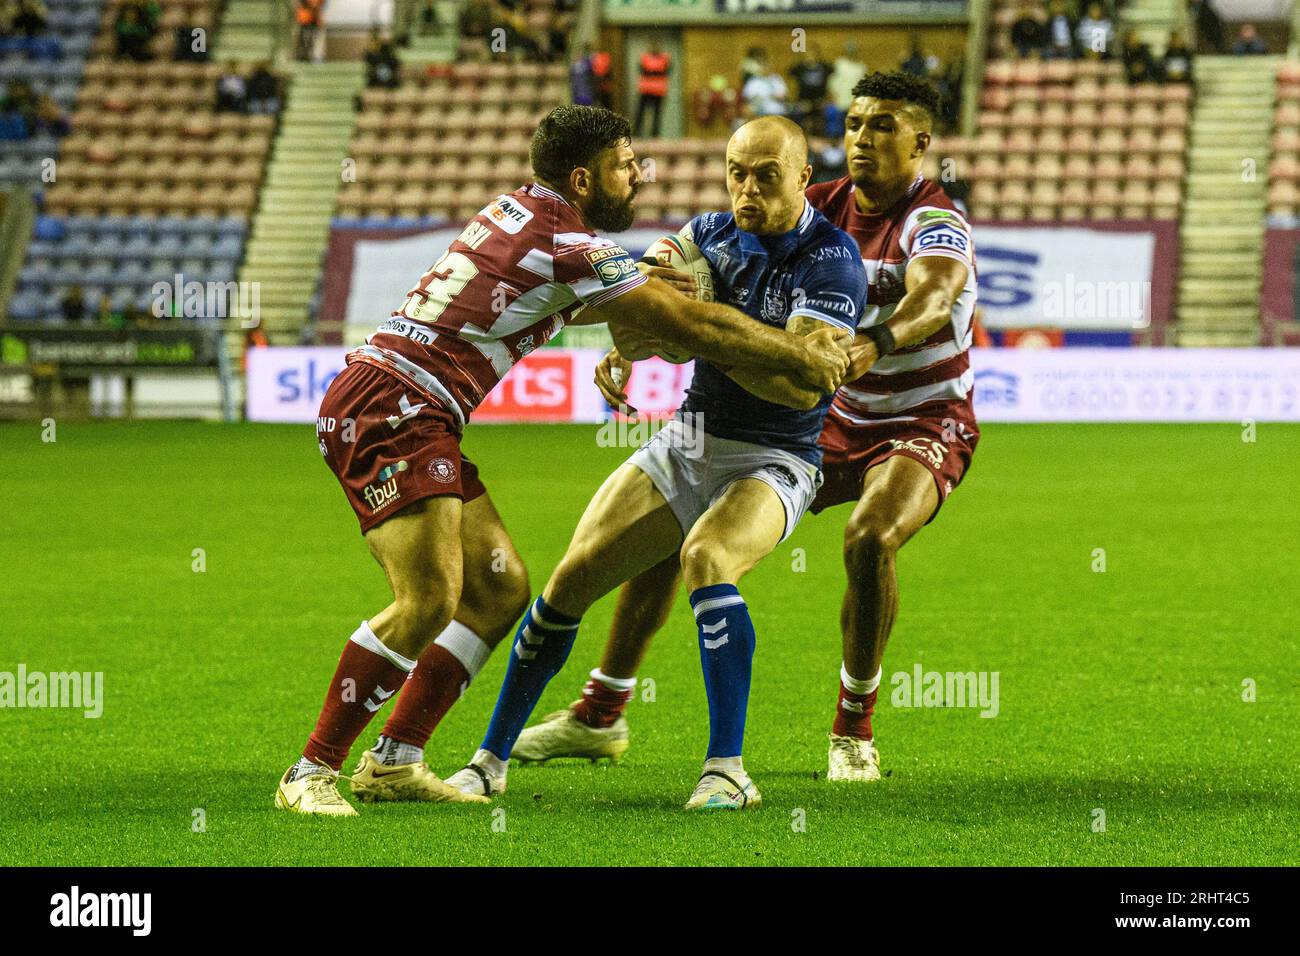 Hull FCs Adam Swift is tackled by Warriors Abbas Miski and Junior Nsemba during the BetFred Super League match between Wigan Warriors and Hull Football Club at the DW Stadium, Wigan on